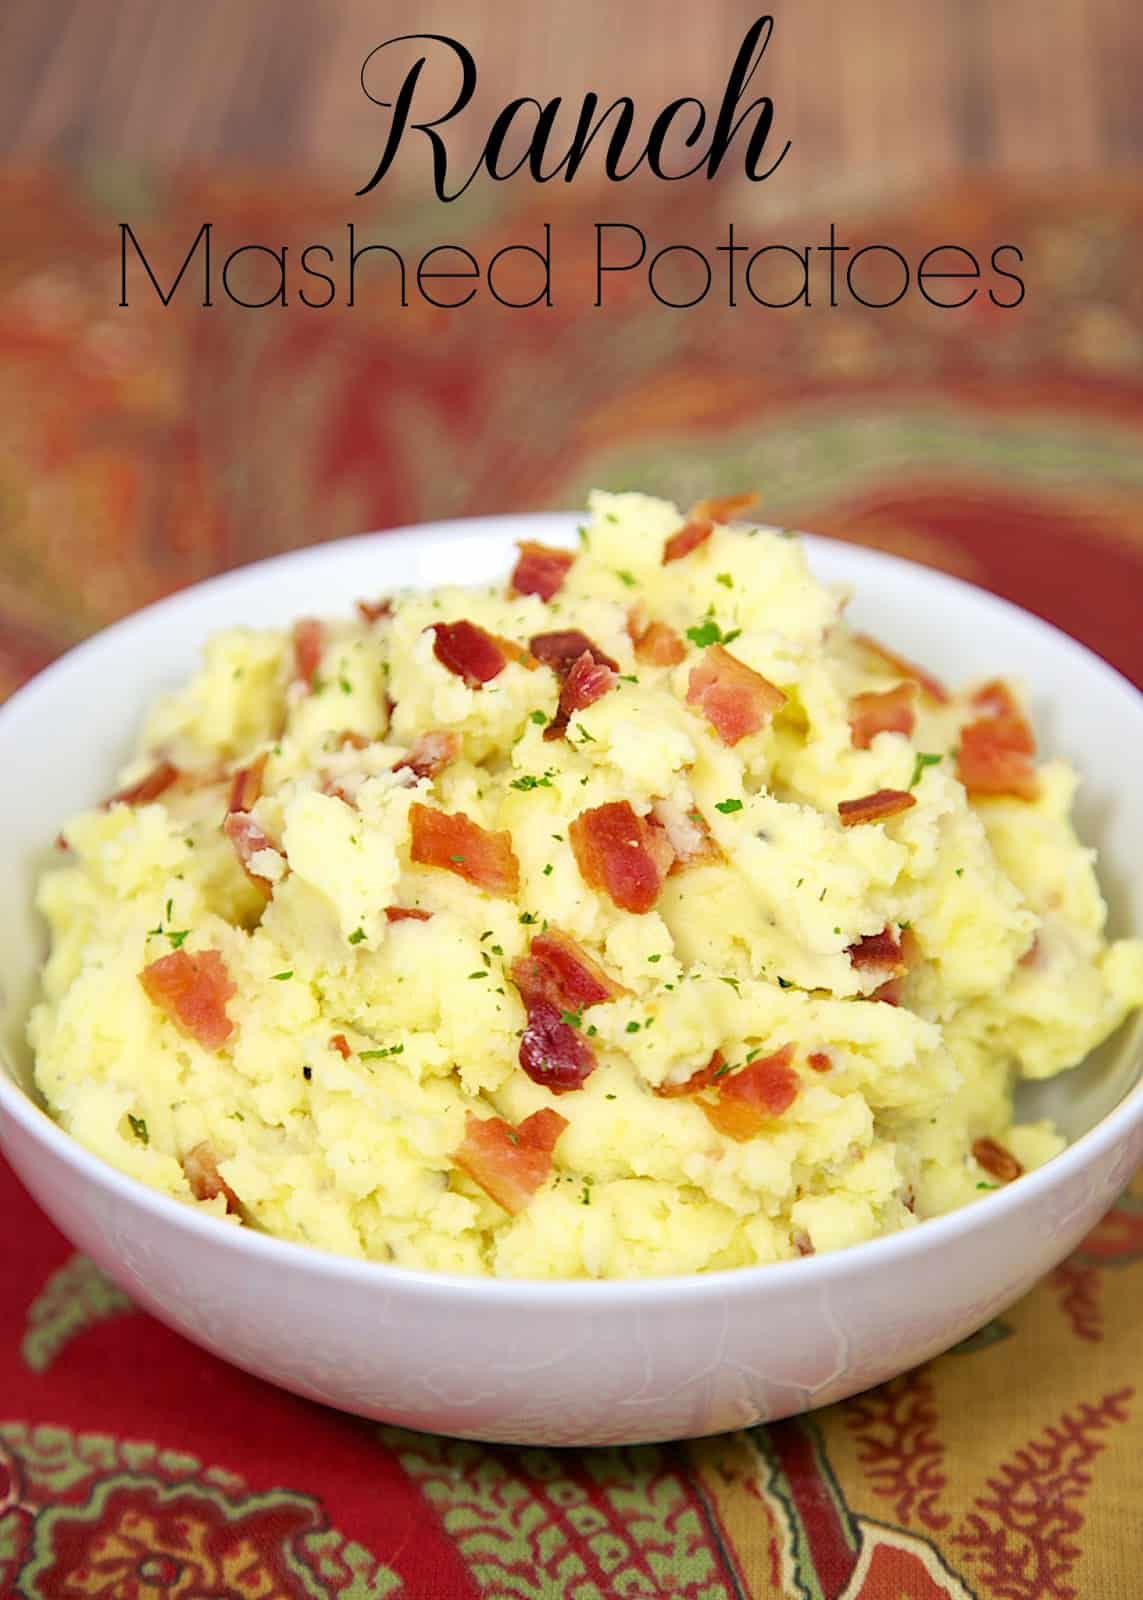 Ranch Mashed Potatoes - yukon gold potatoes, butter, Ranch dressing and bacon. Super quick side dish that packs tons of flavor!